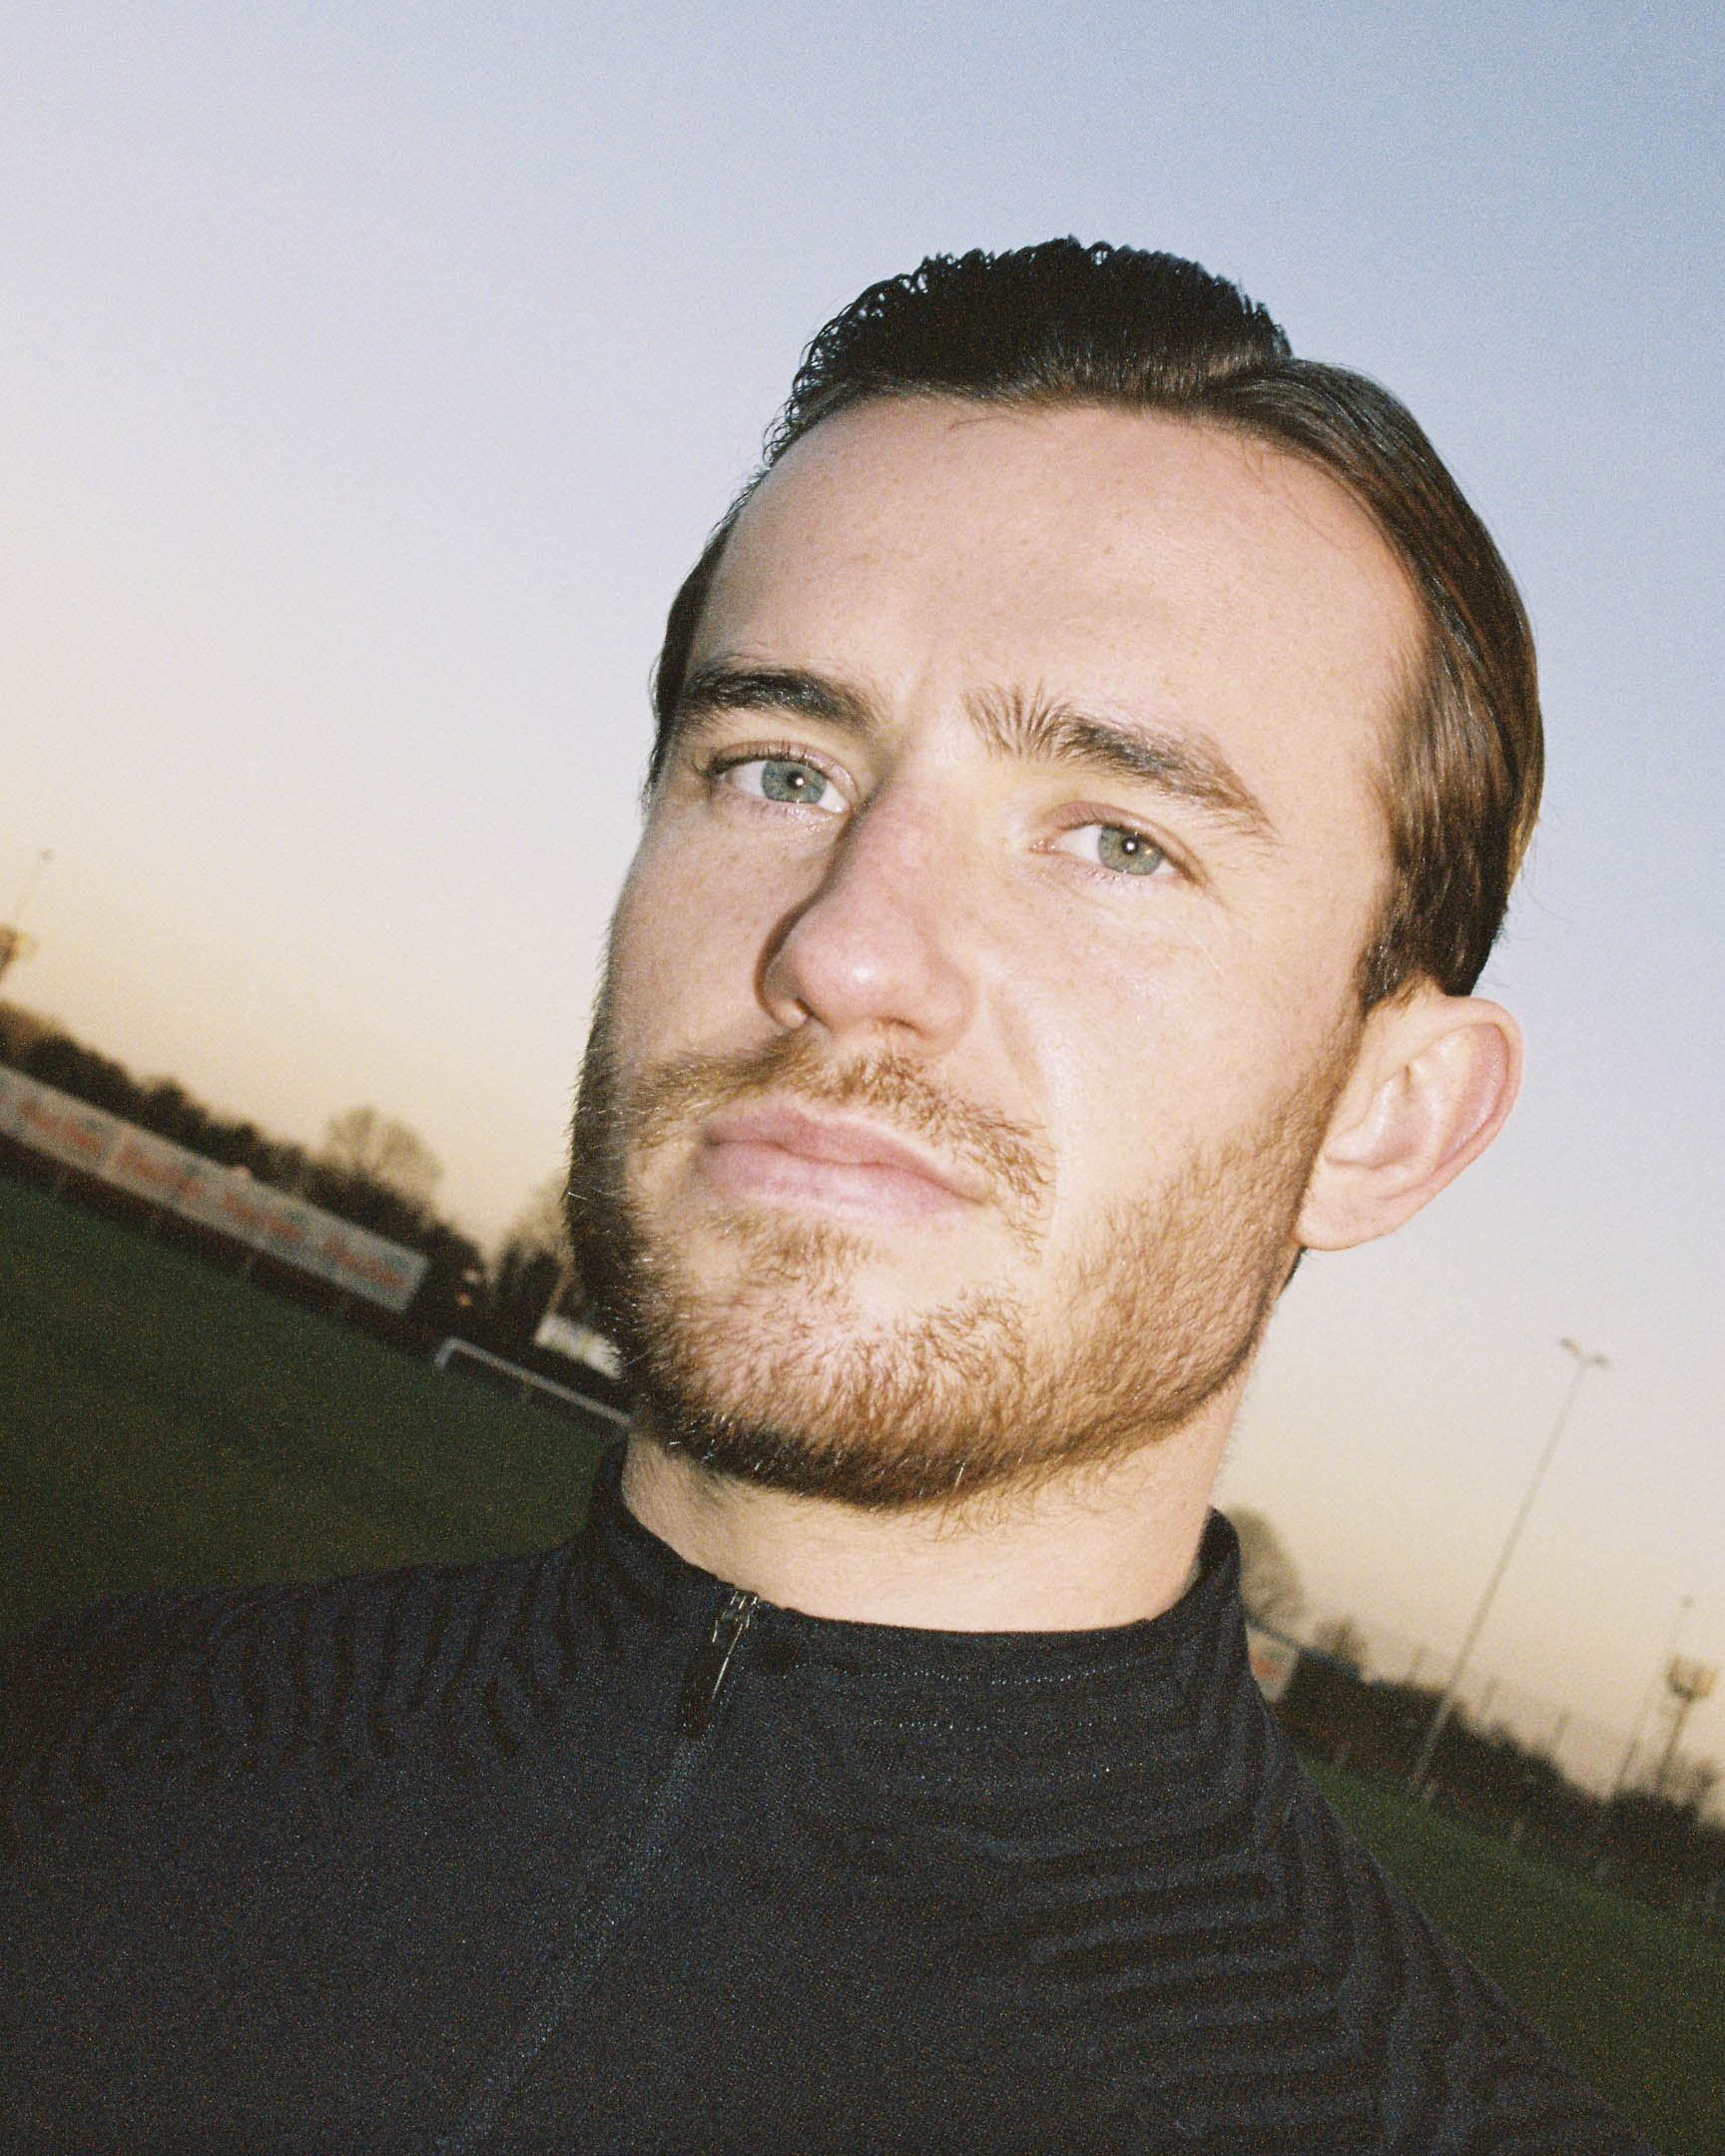 SOCCERBIBLE BEN CHILWELL DIAL UP_0003_CHILWELL 16.jpg